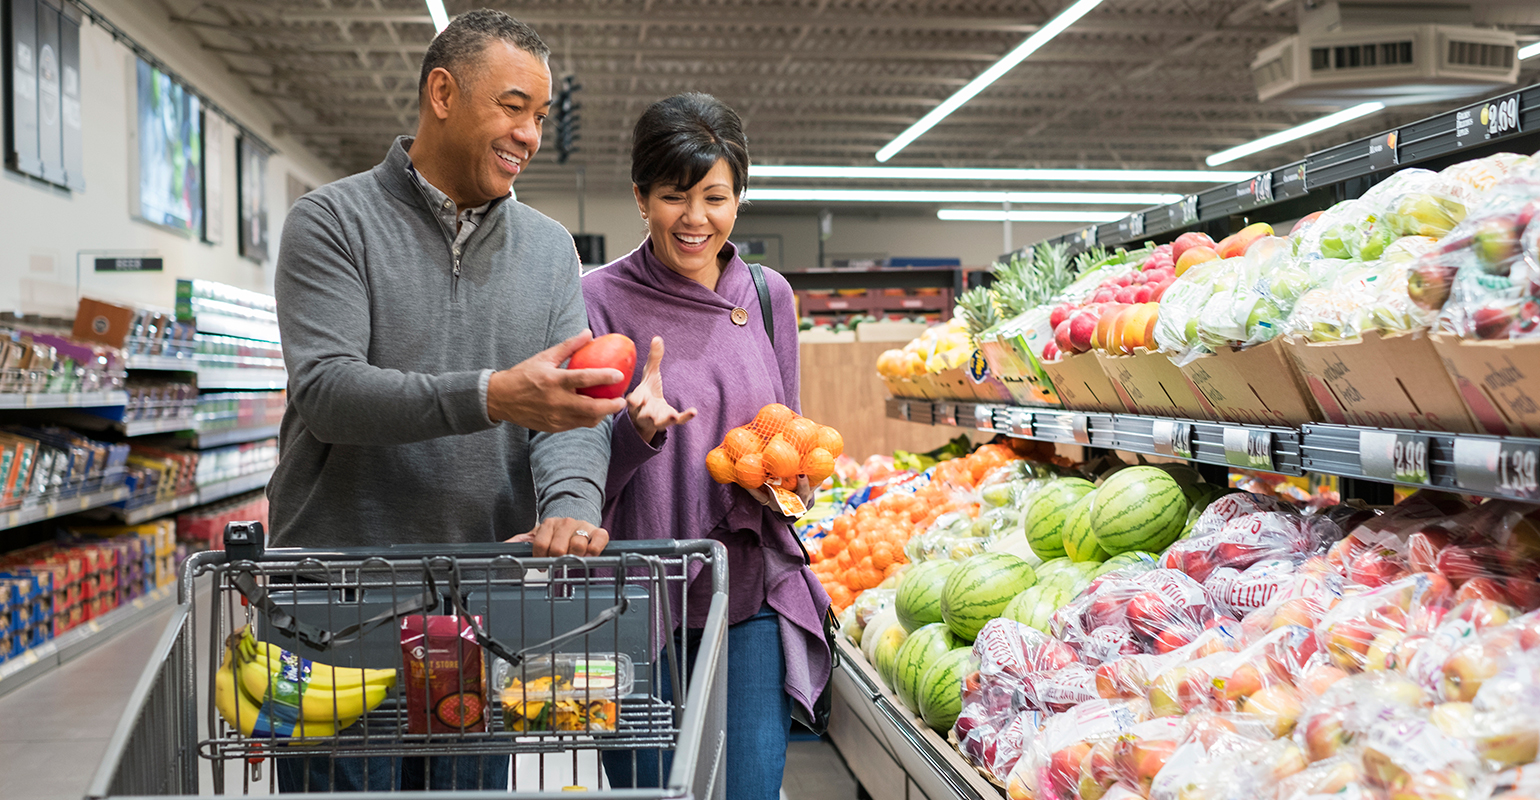 Aldi expands fresh offering with systemwide remodel Supermarket News